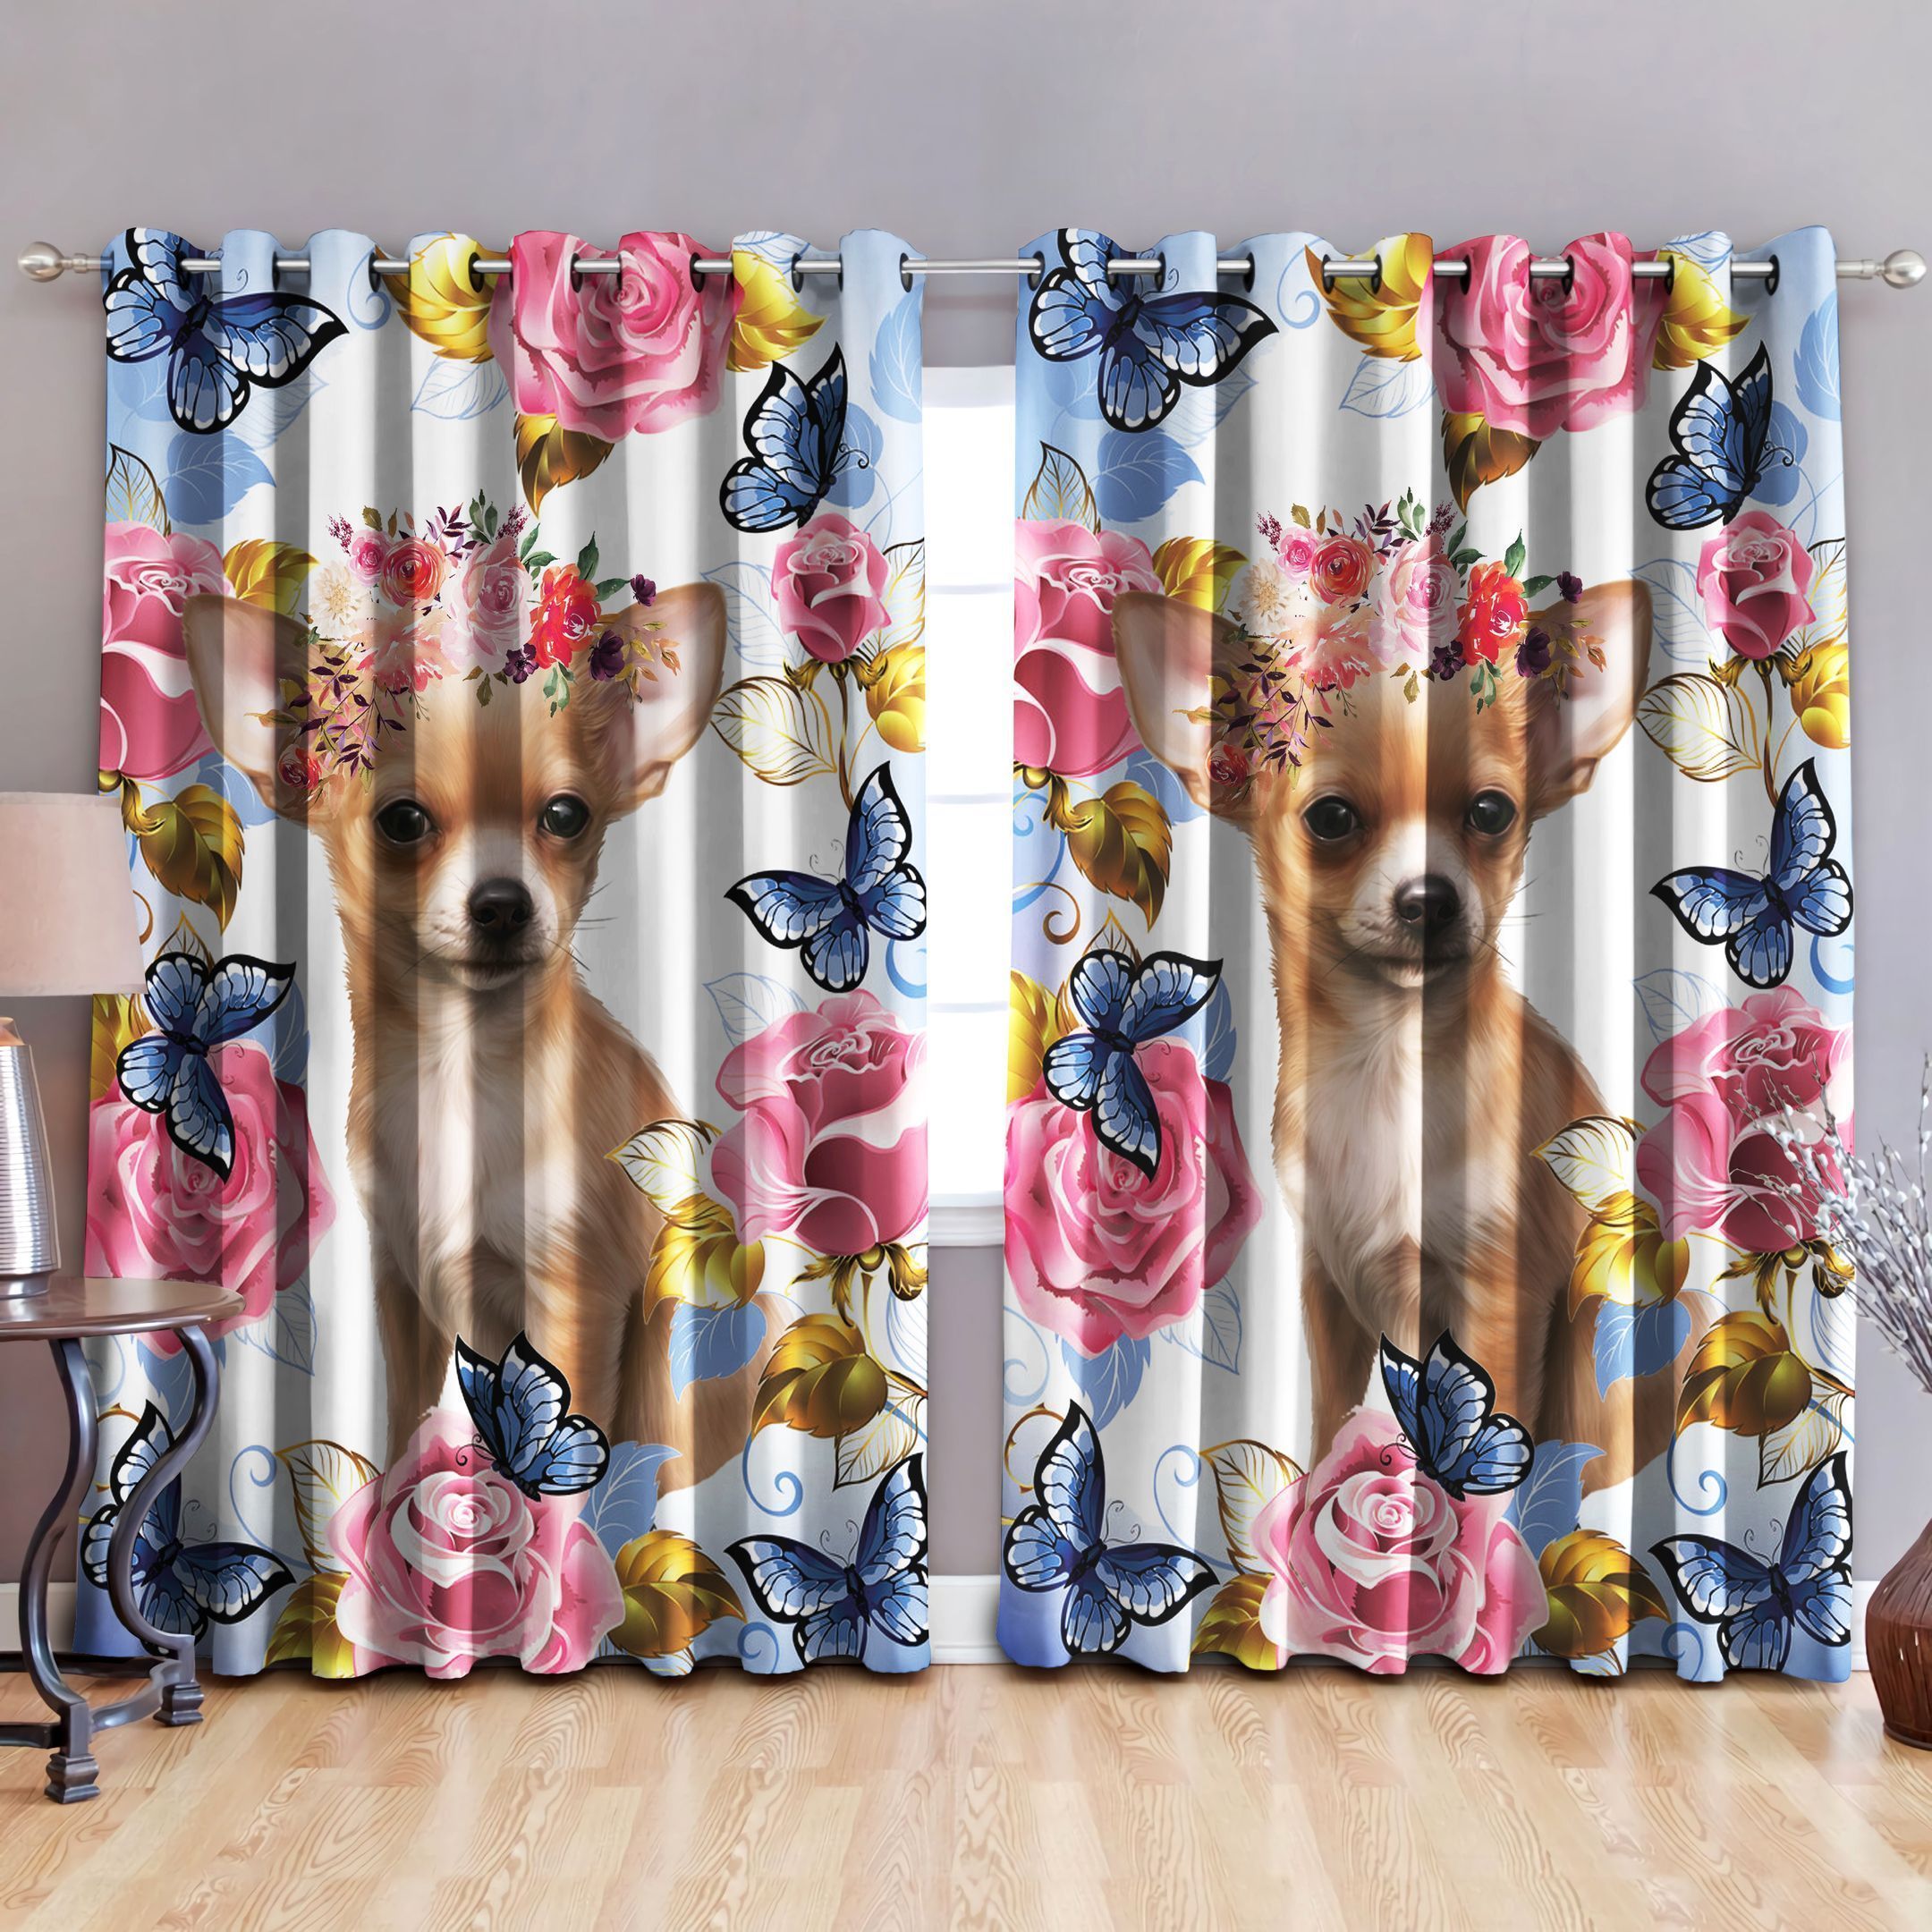 Chihuahua Butterflies And Pink Rose Printed Window Curtain Home Decor